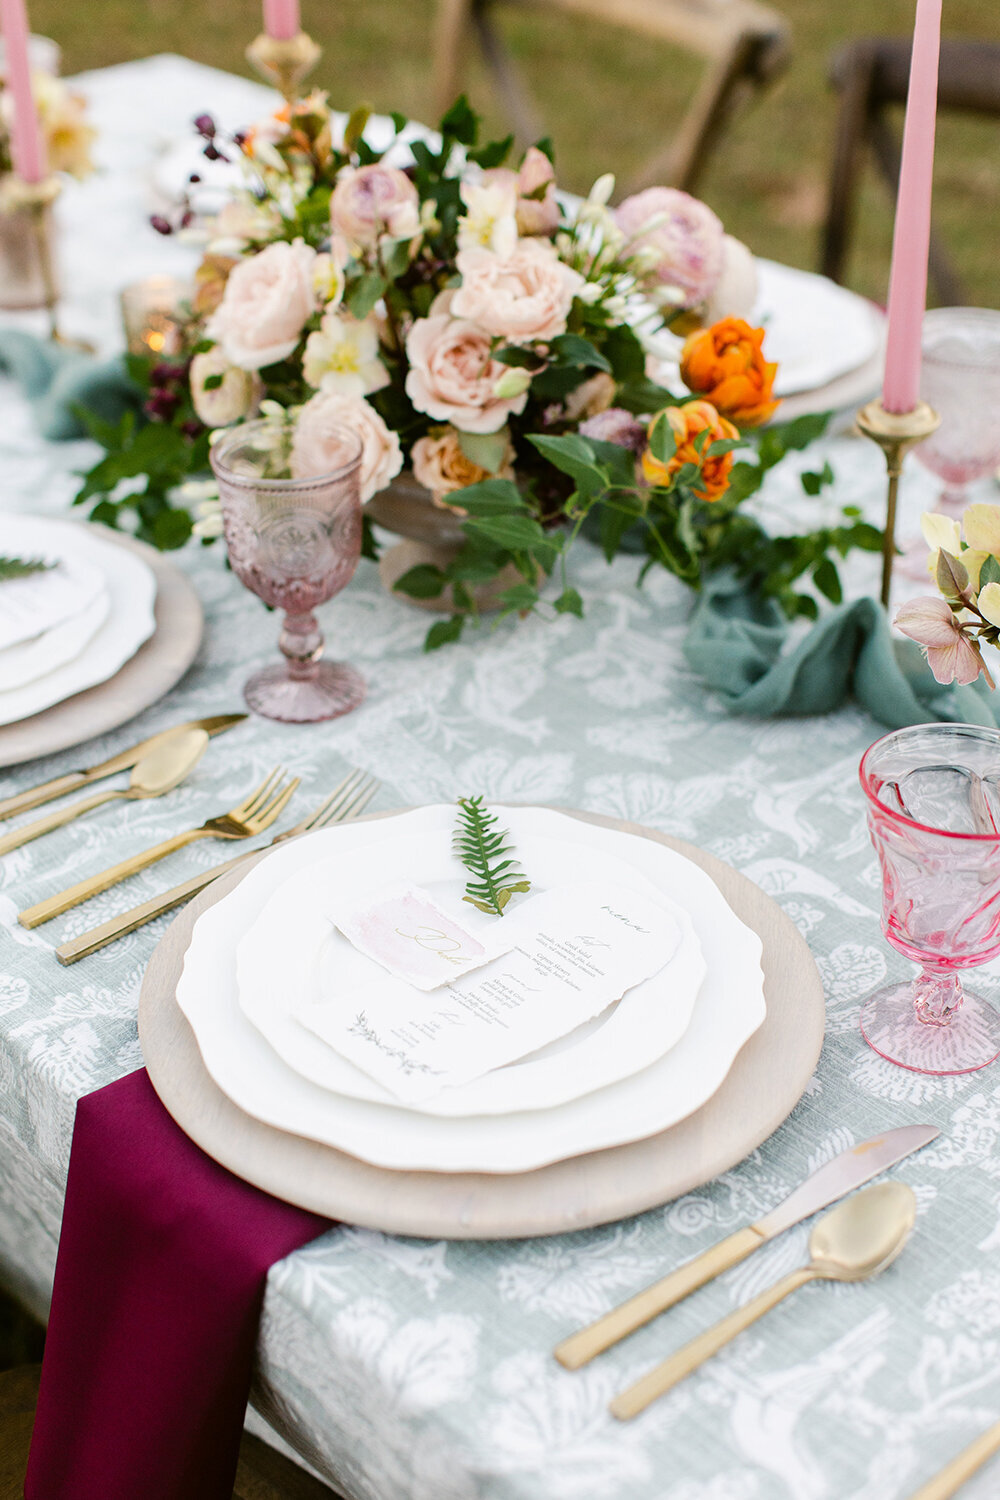 Table setting with menu on plate.